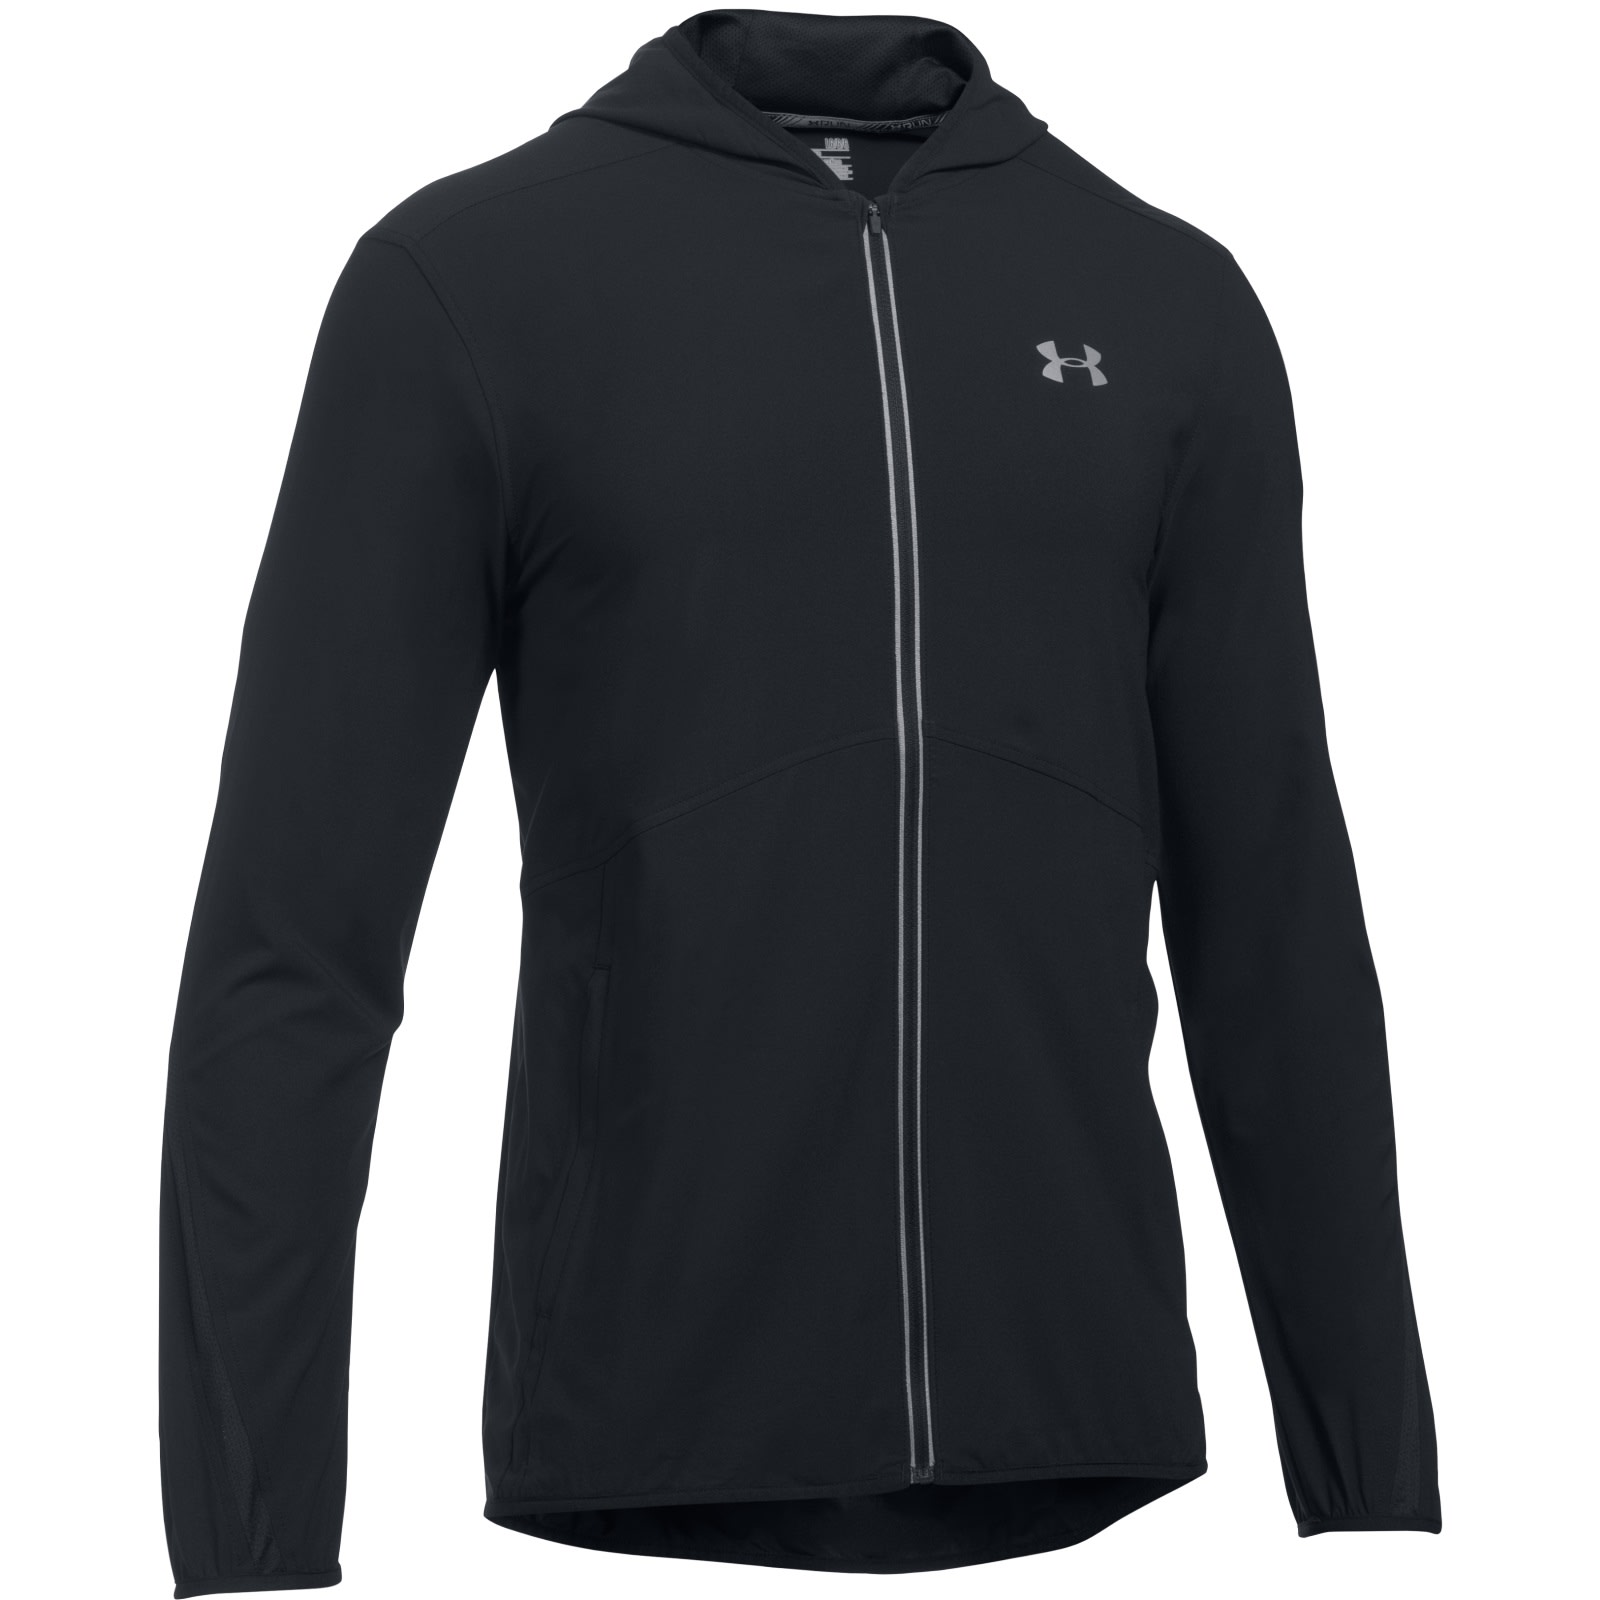 Buy Under Armour Men´s Run True Jacket from Outnorth